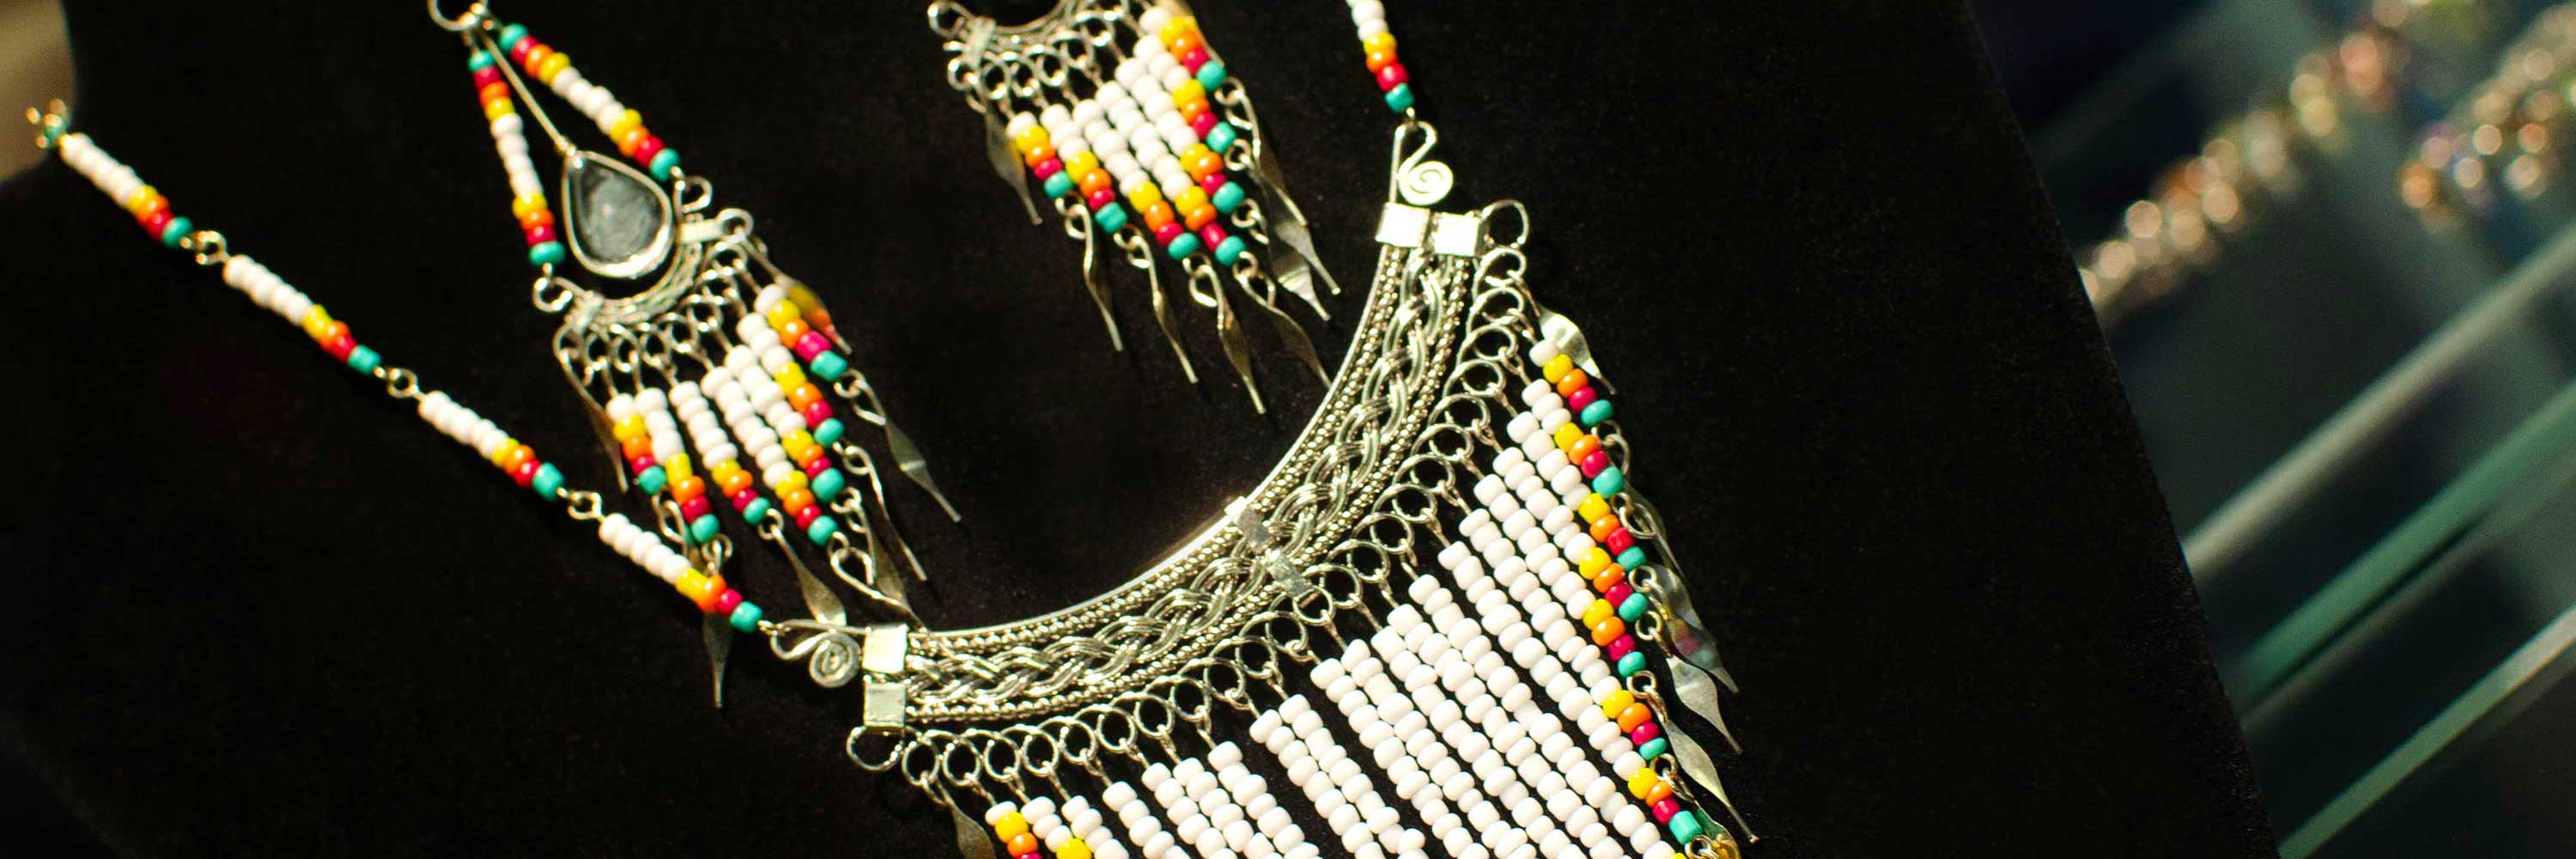 A photo of a beaded necklace